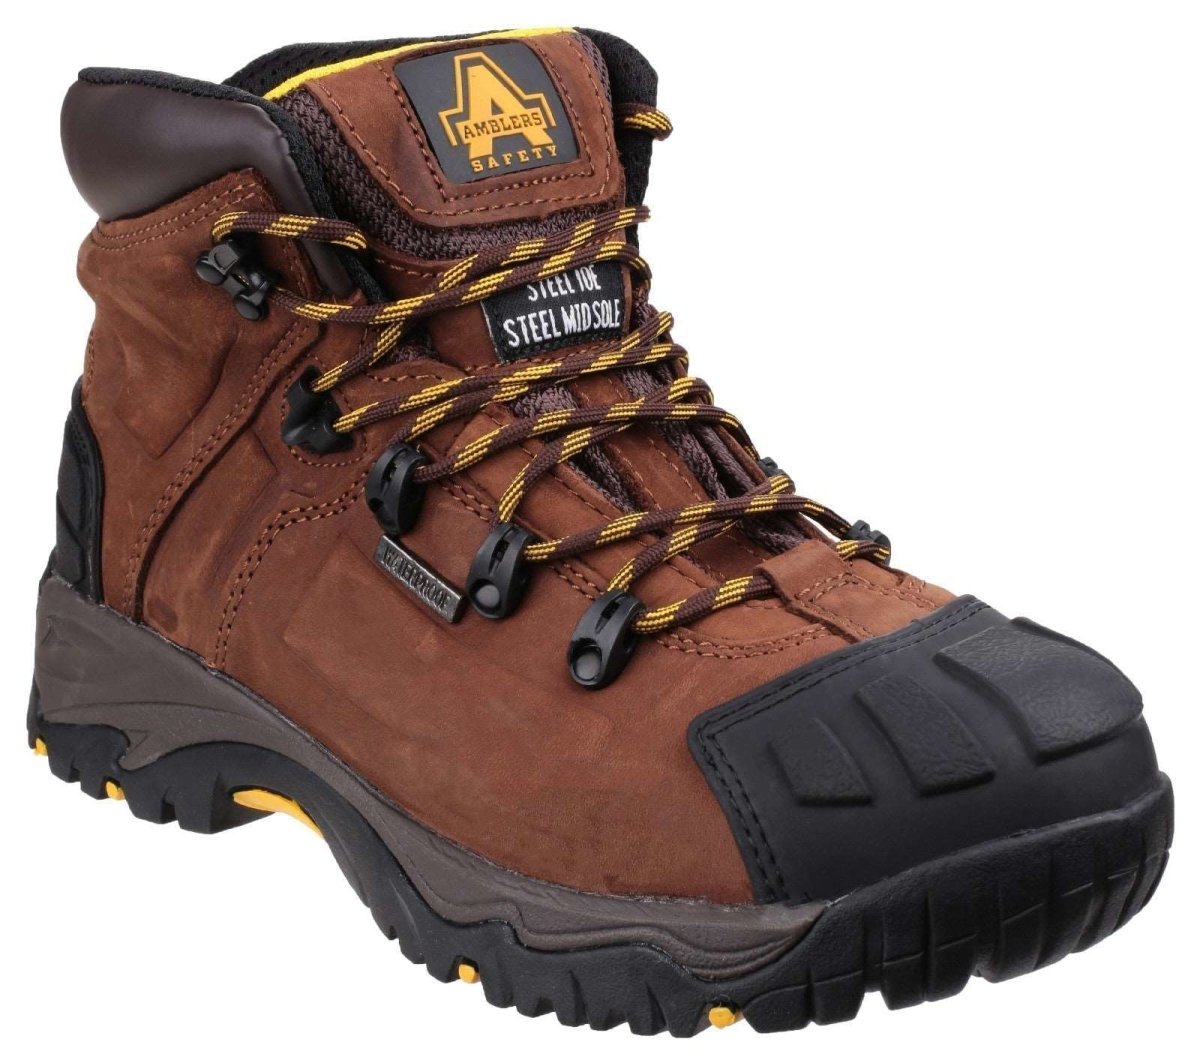 Amblers FS39 Waterproof Safety Boots - Shoe Store Direct